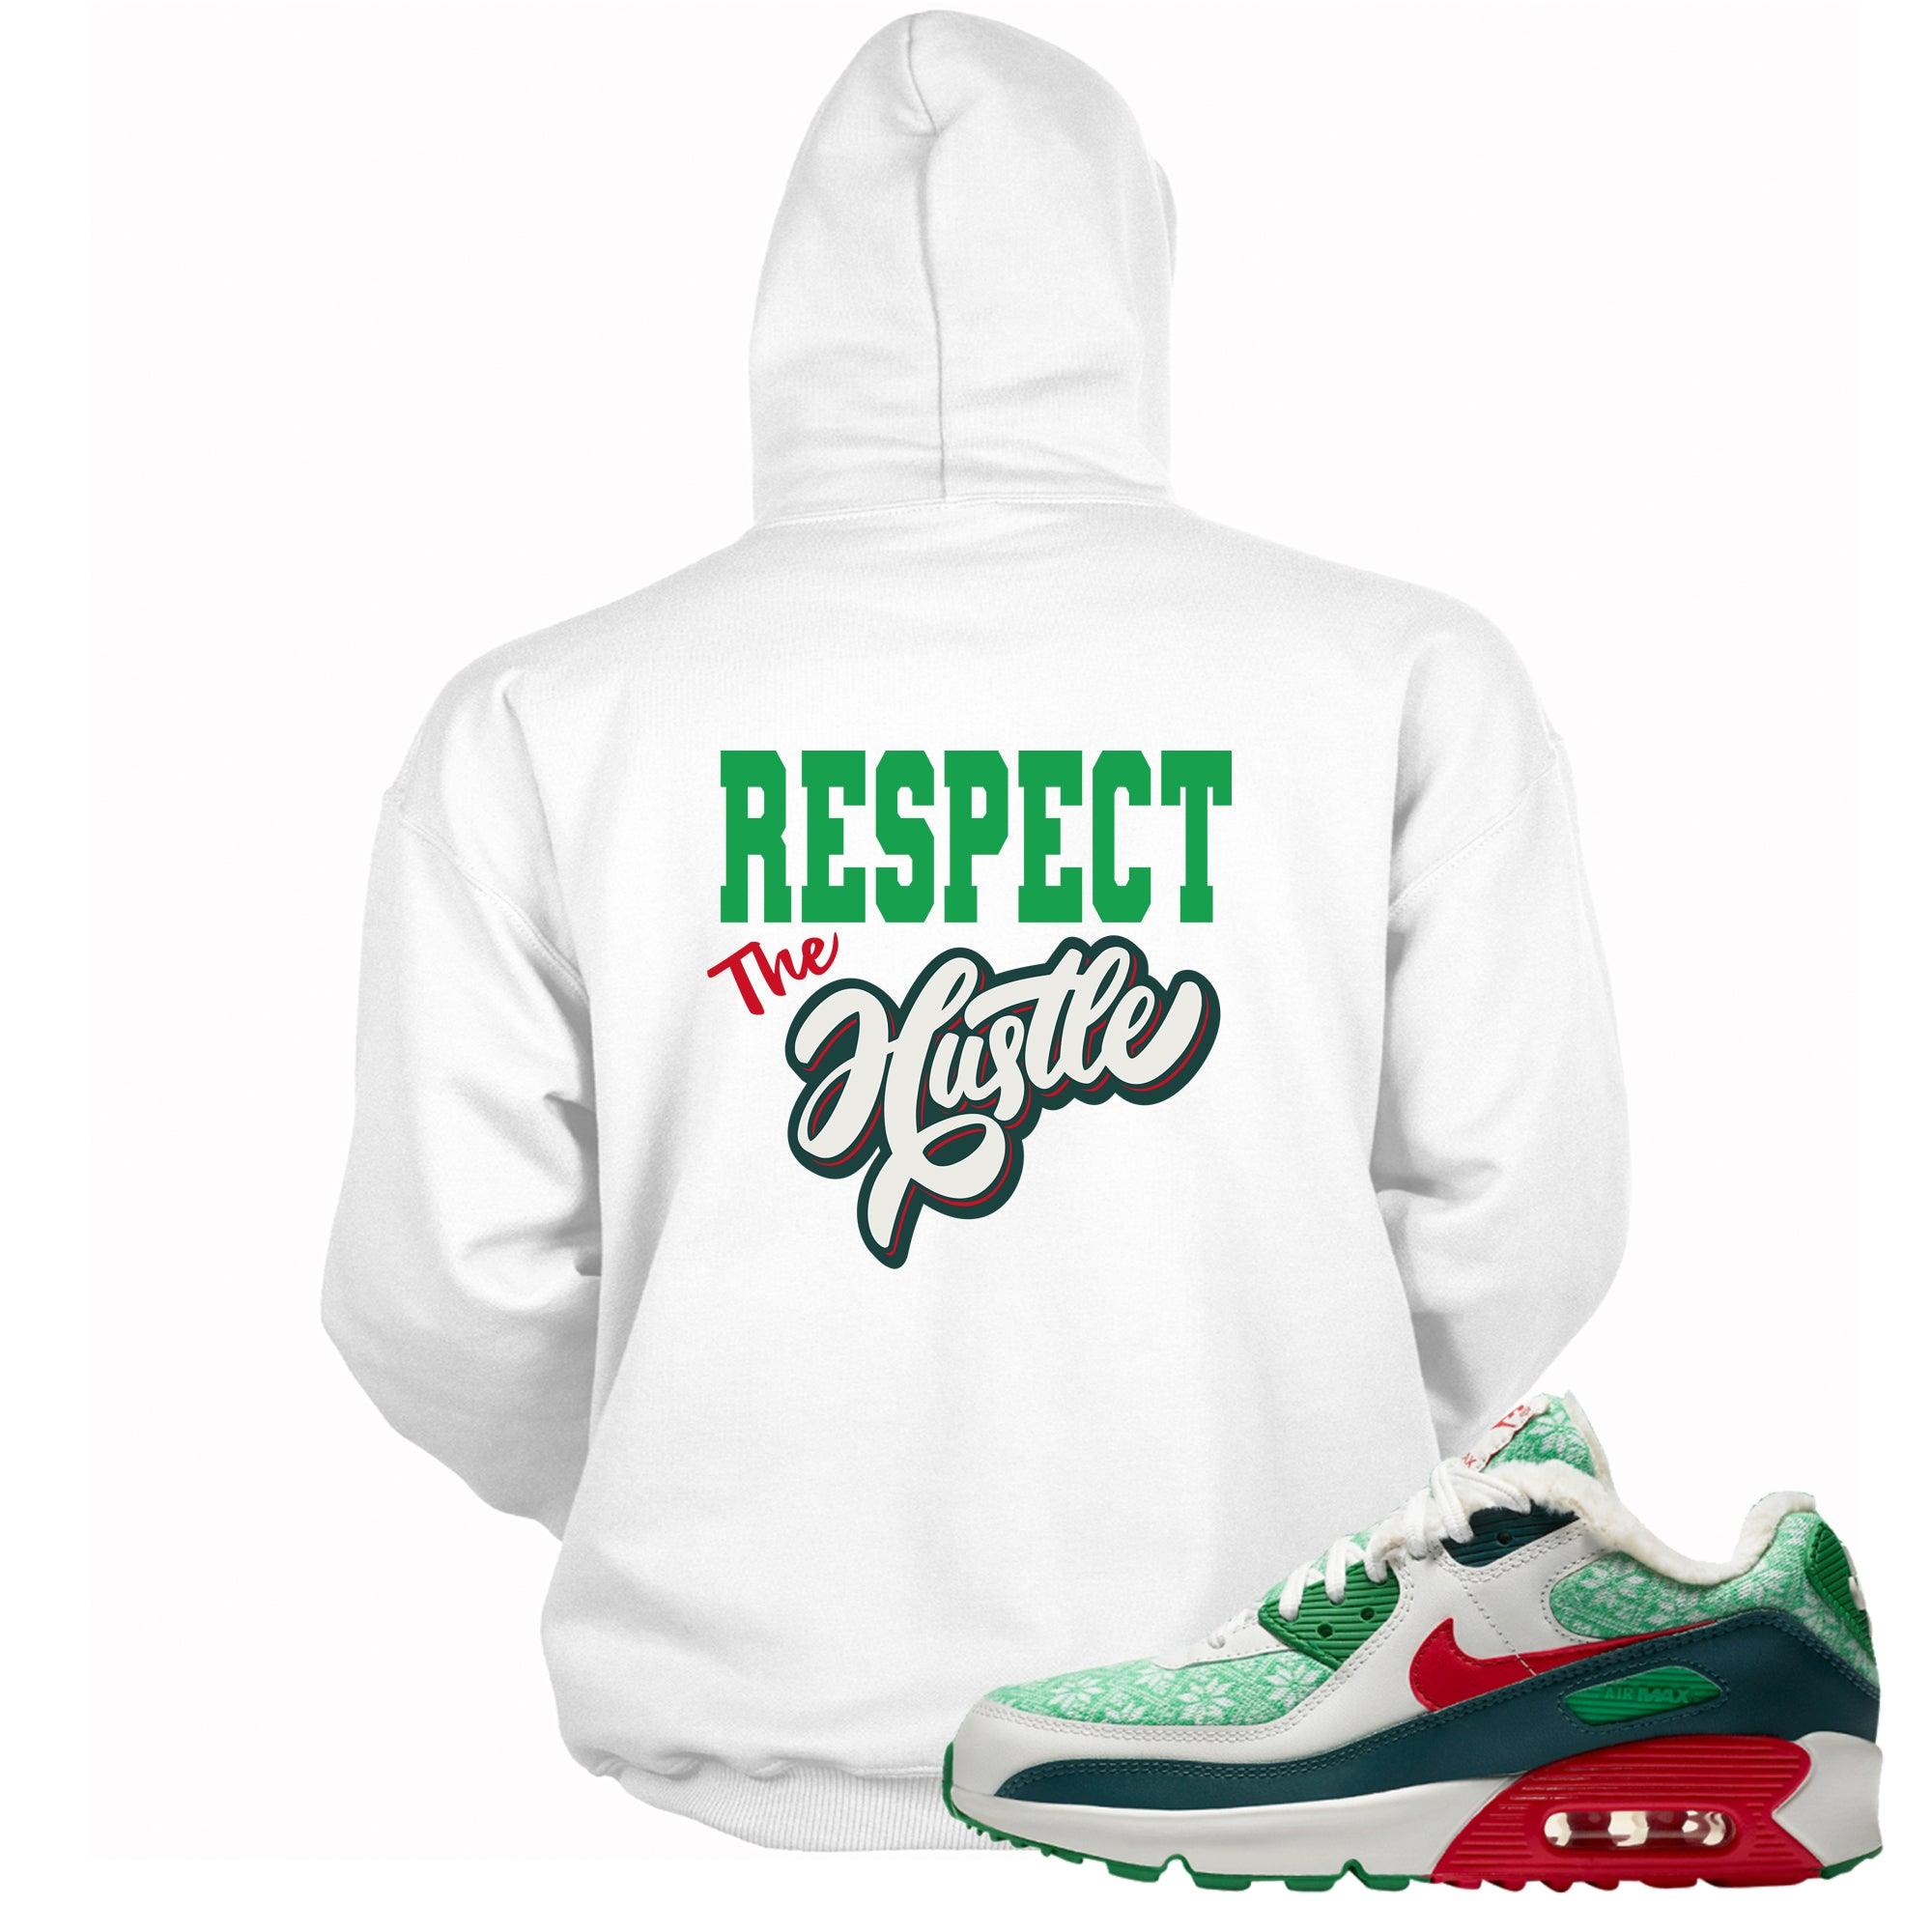 Respect The Hustle Hoodie AIR MAX 90 NORDIC CHRISTMAS photo